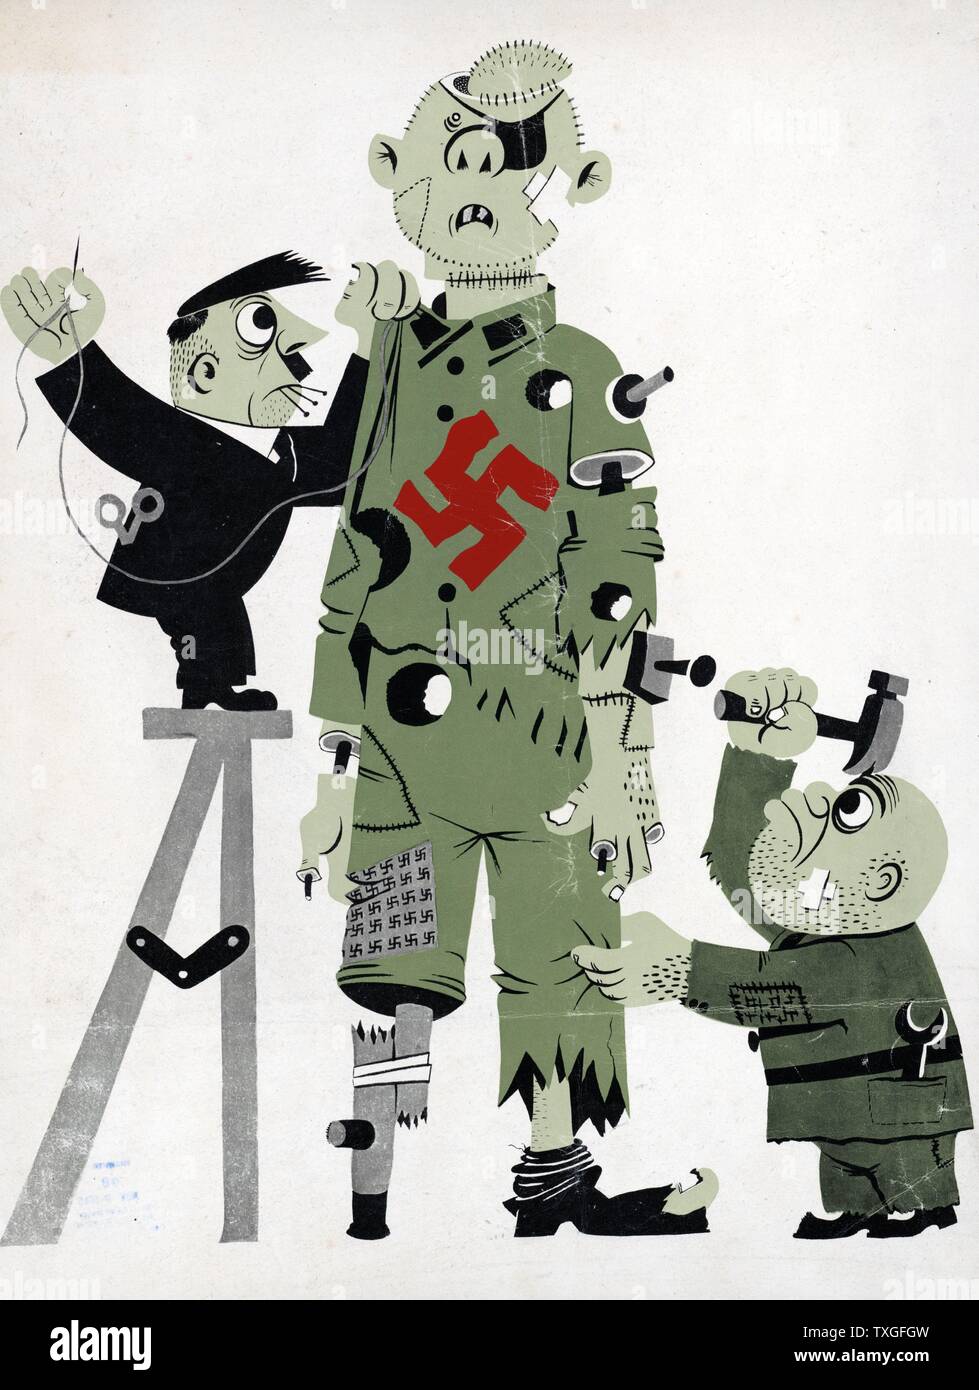 American cartoon of Hitler and Mussolini tacking together a broken puppet representing the axis; the puppet has a large red swastika on its chest. 1944 Stock Photo